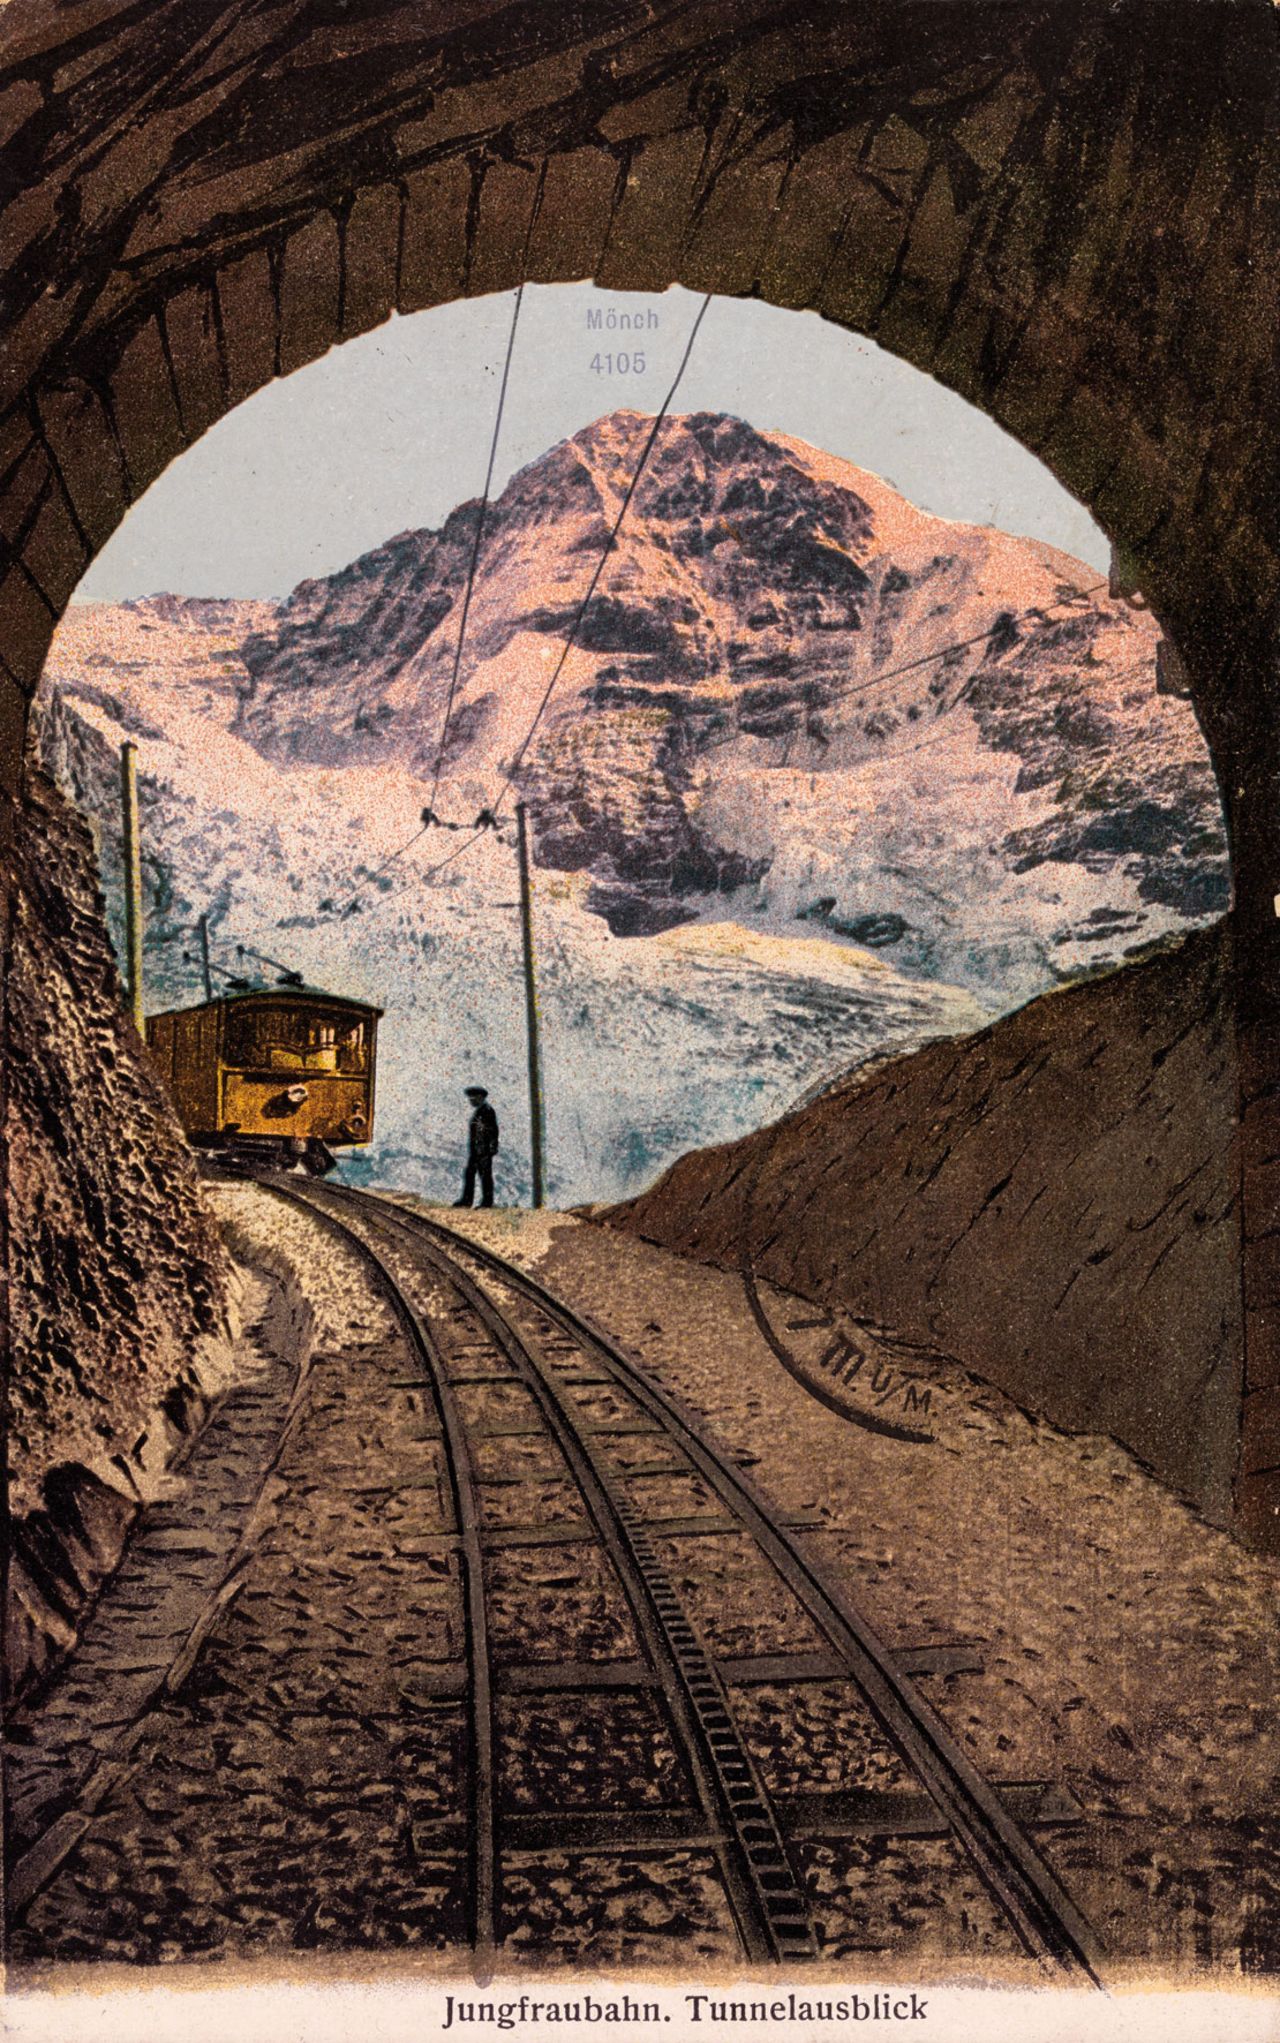 This card postmarked 1926 shows a funicular train on Switzerland's Jungfrau Railway, which connects to Jungfraujoch, the highest station in Europe.